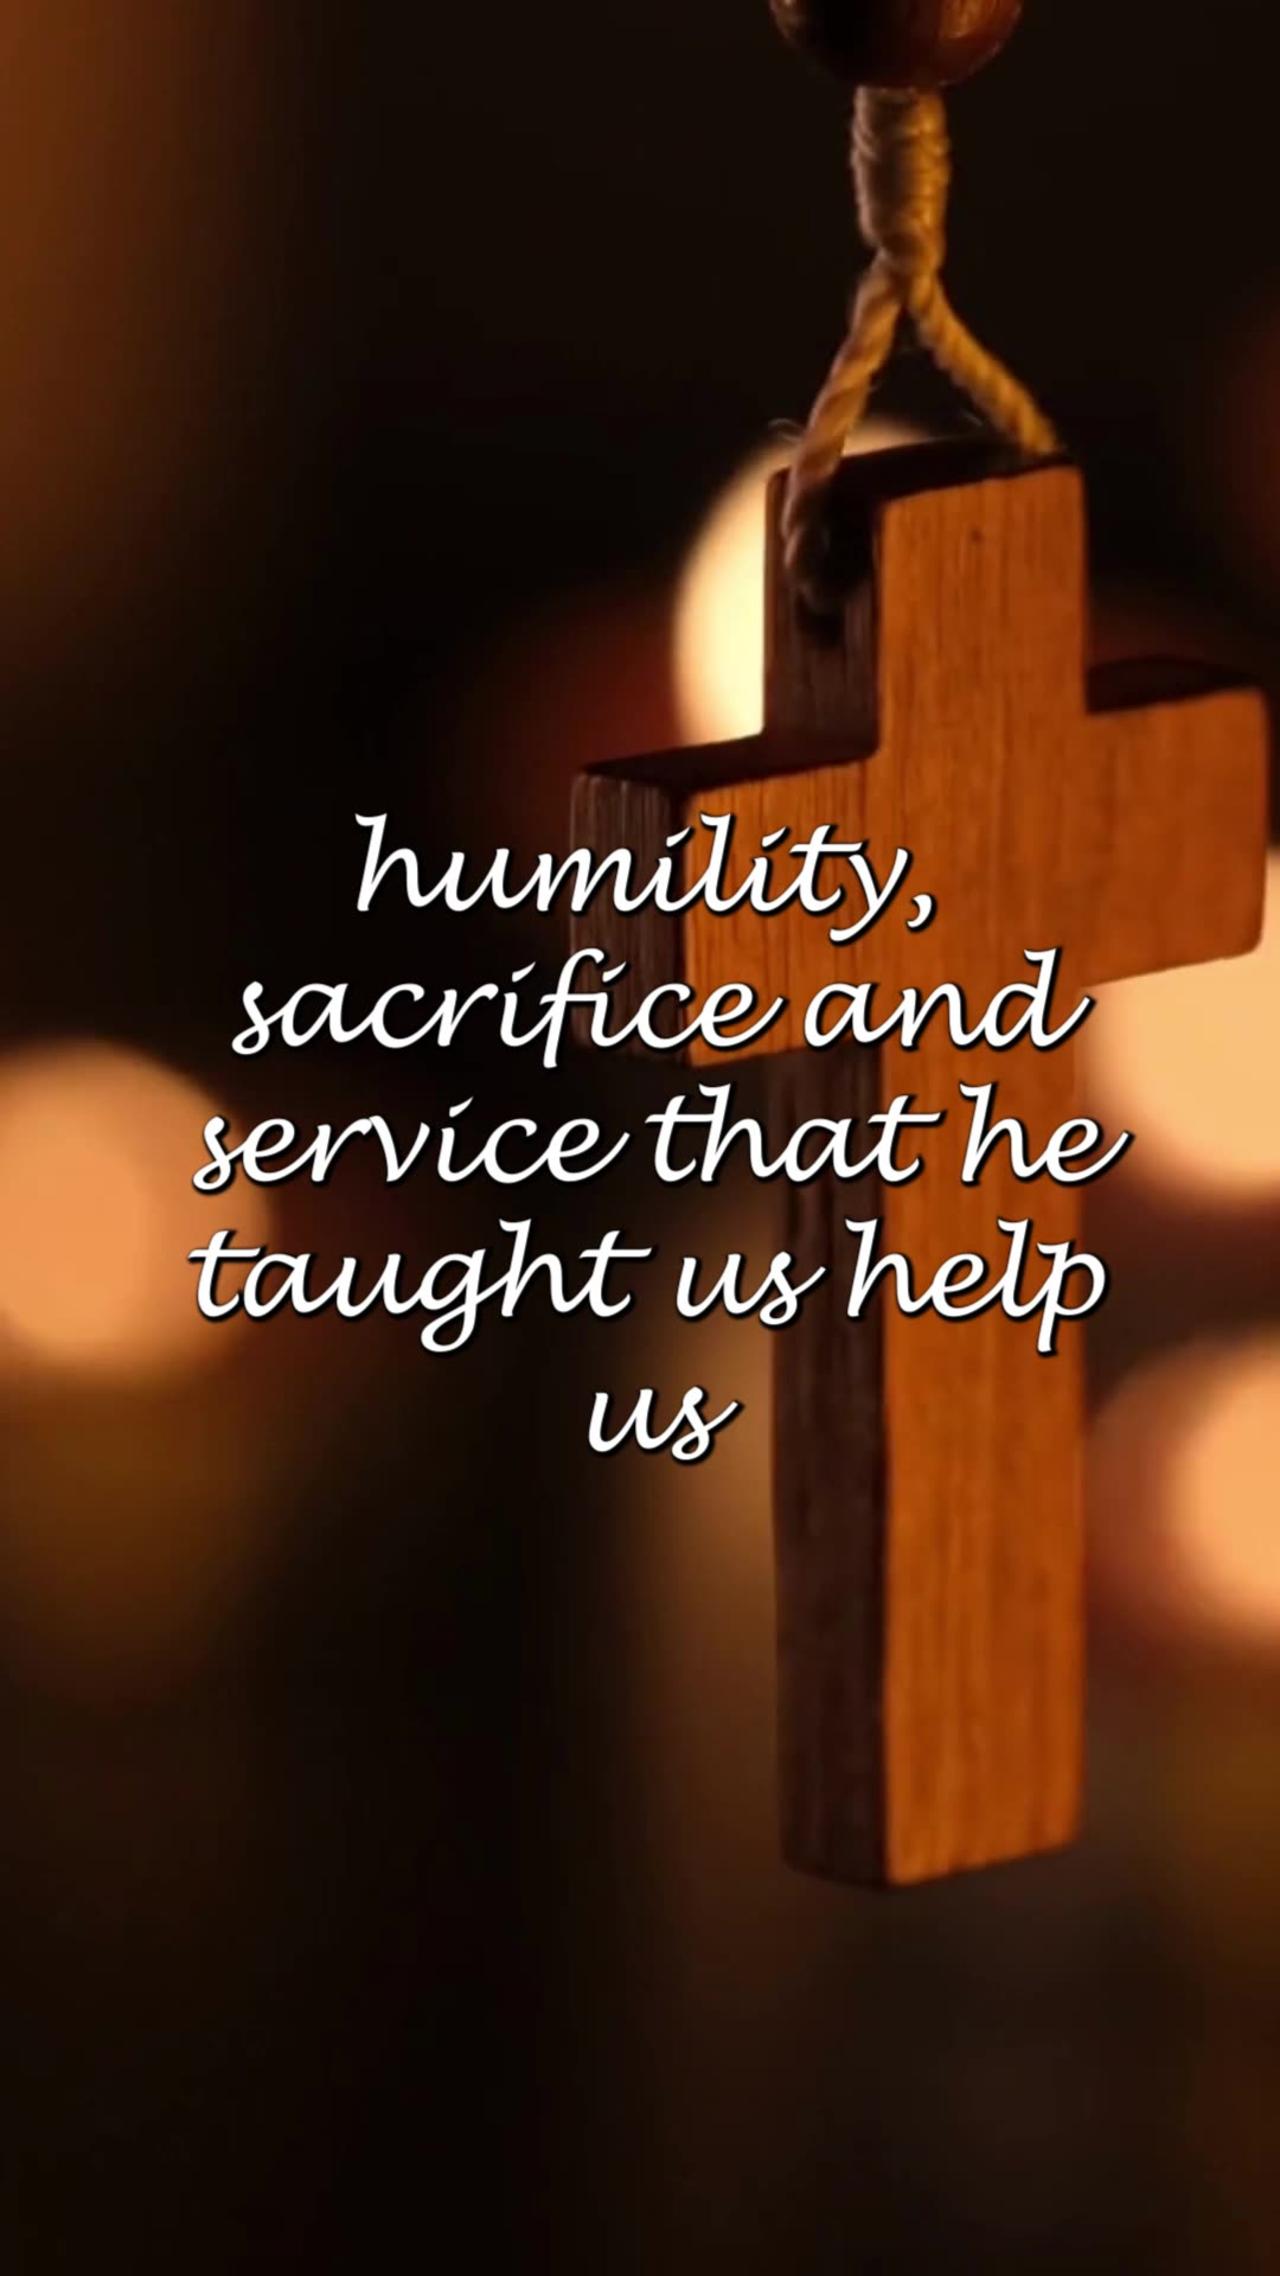 Embodying the Spirit of Maundy Thursday: A Prayer for Humility, Service, and Compassion.